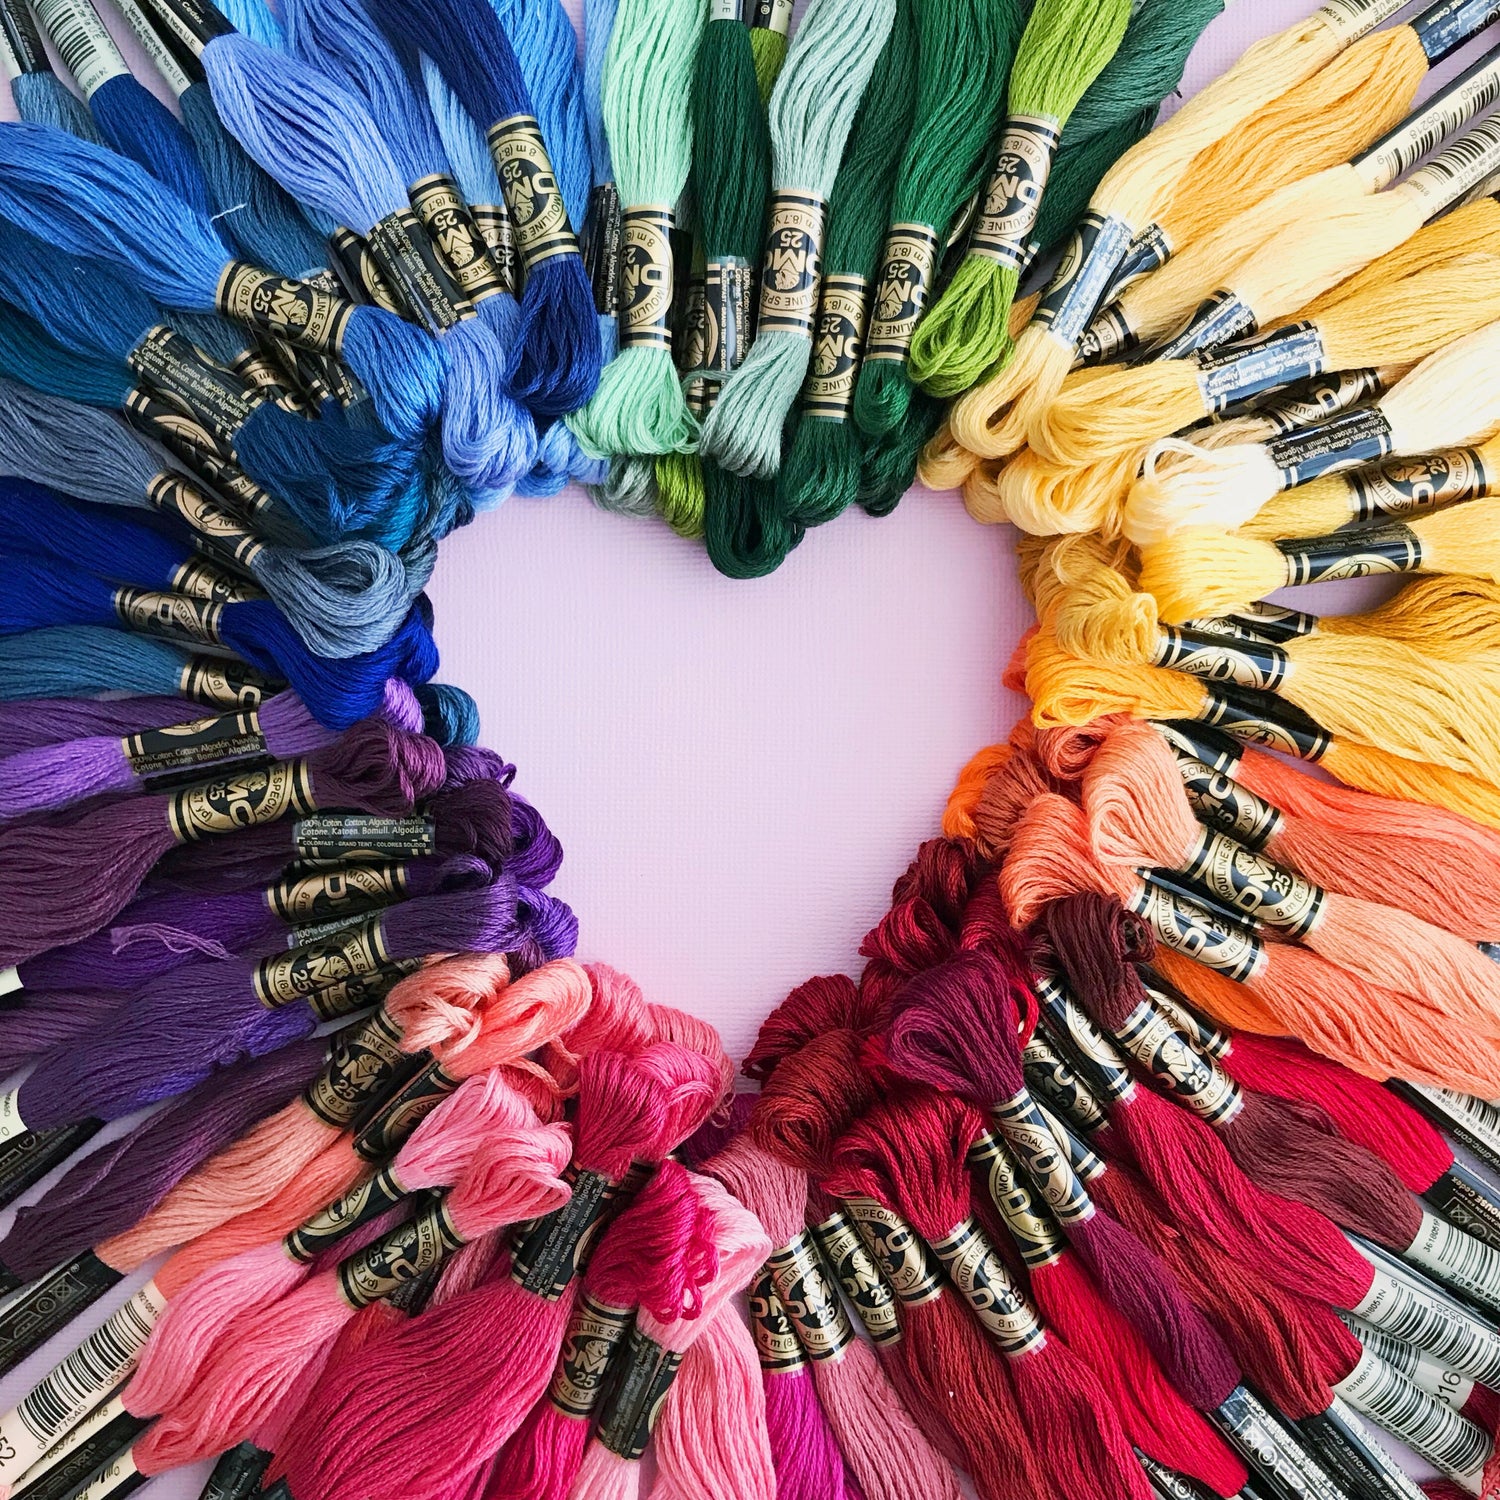 Image of multi-colored thread arranged into a heart